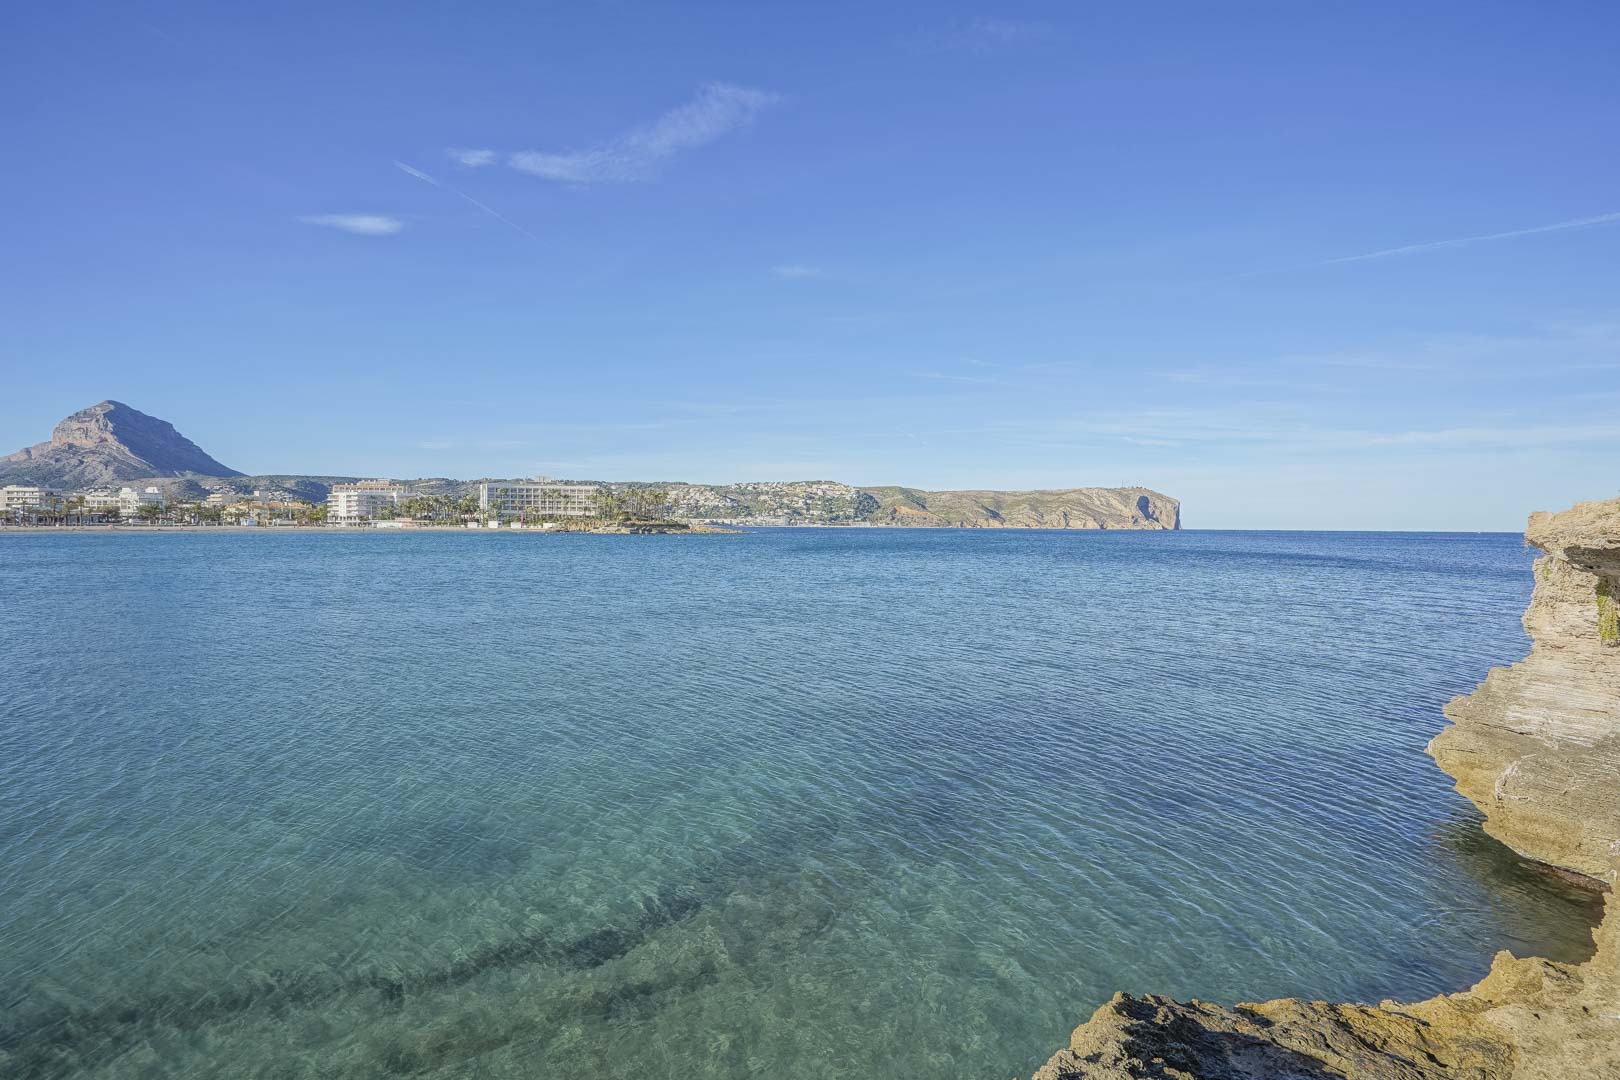 Fully renovated 3-bedroom apartment for sale in Javea just a few meters from the beach